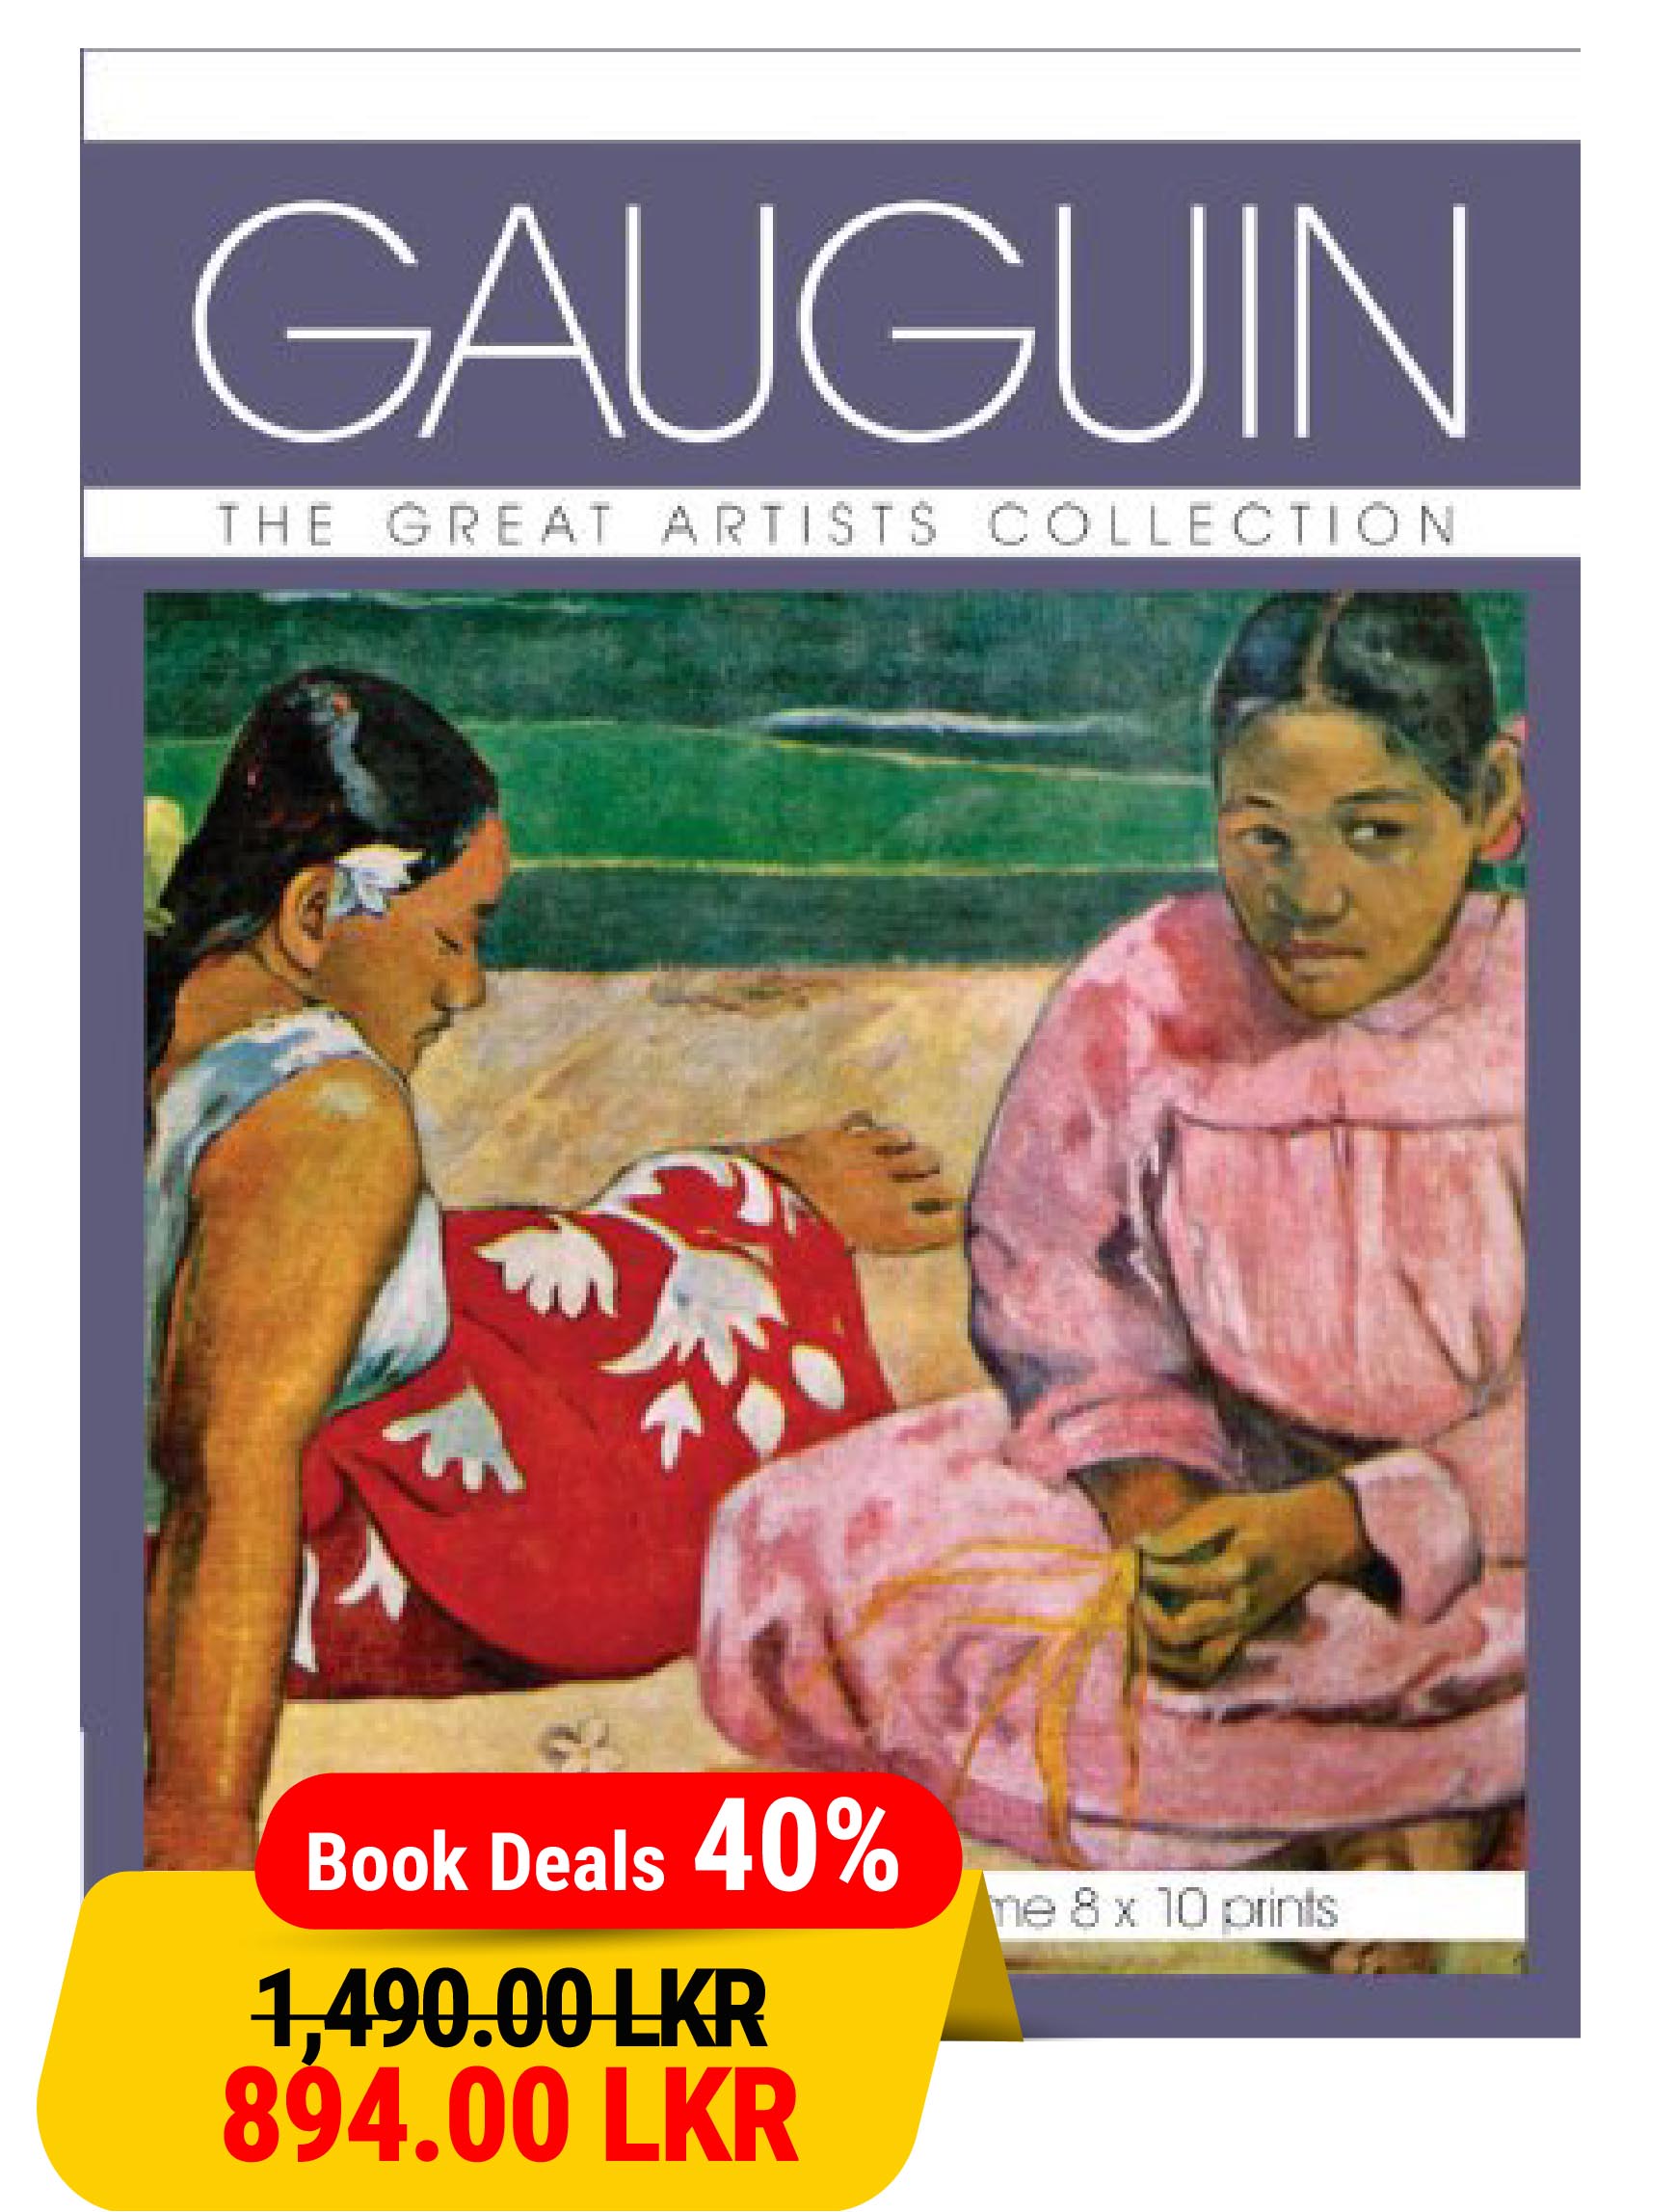 Gauguin The Great Artists Collection Includes 6 Free Ready - to - Frame 8x10 Prints